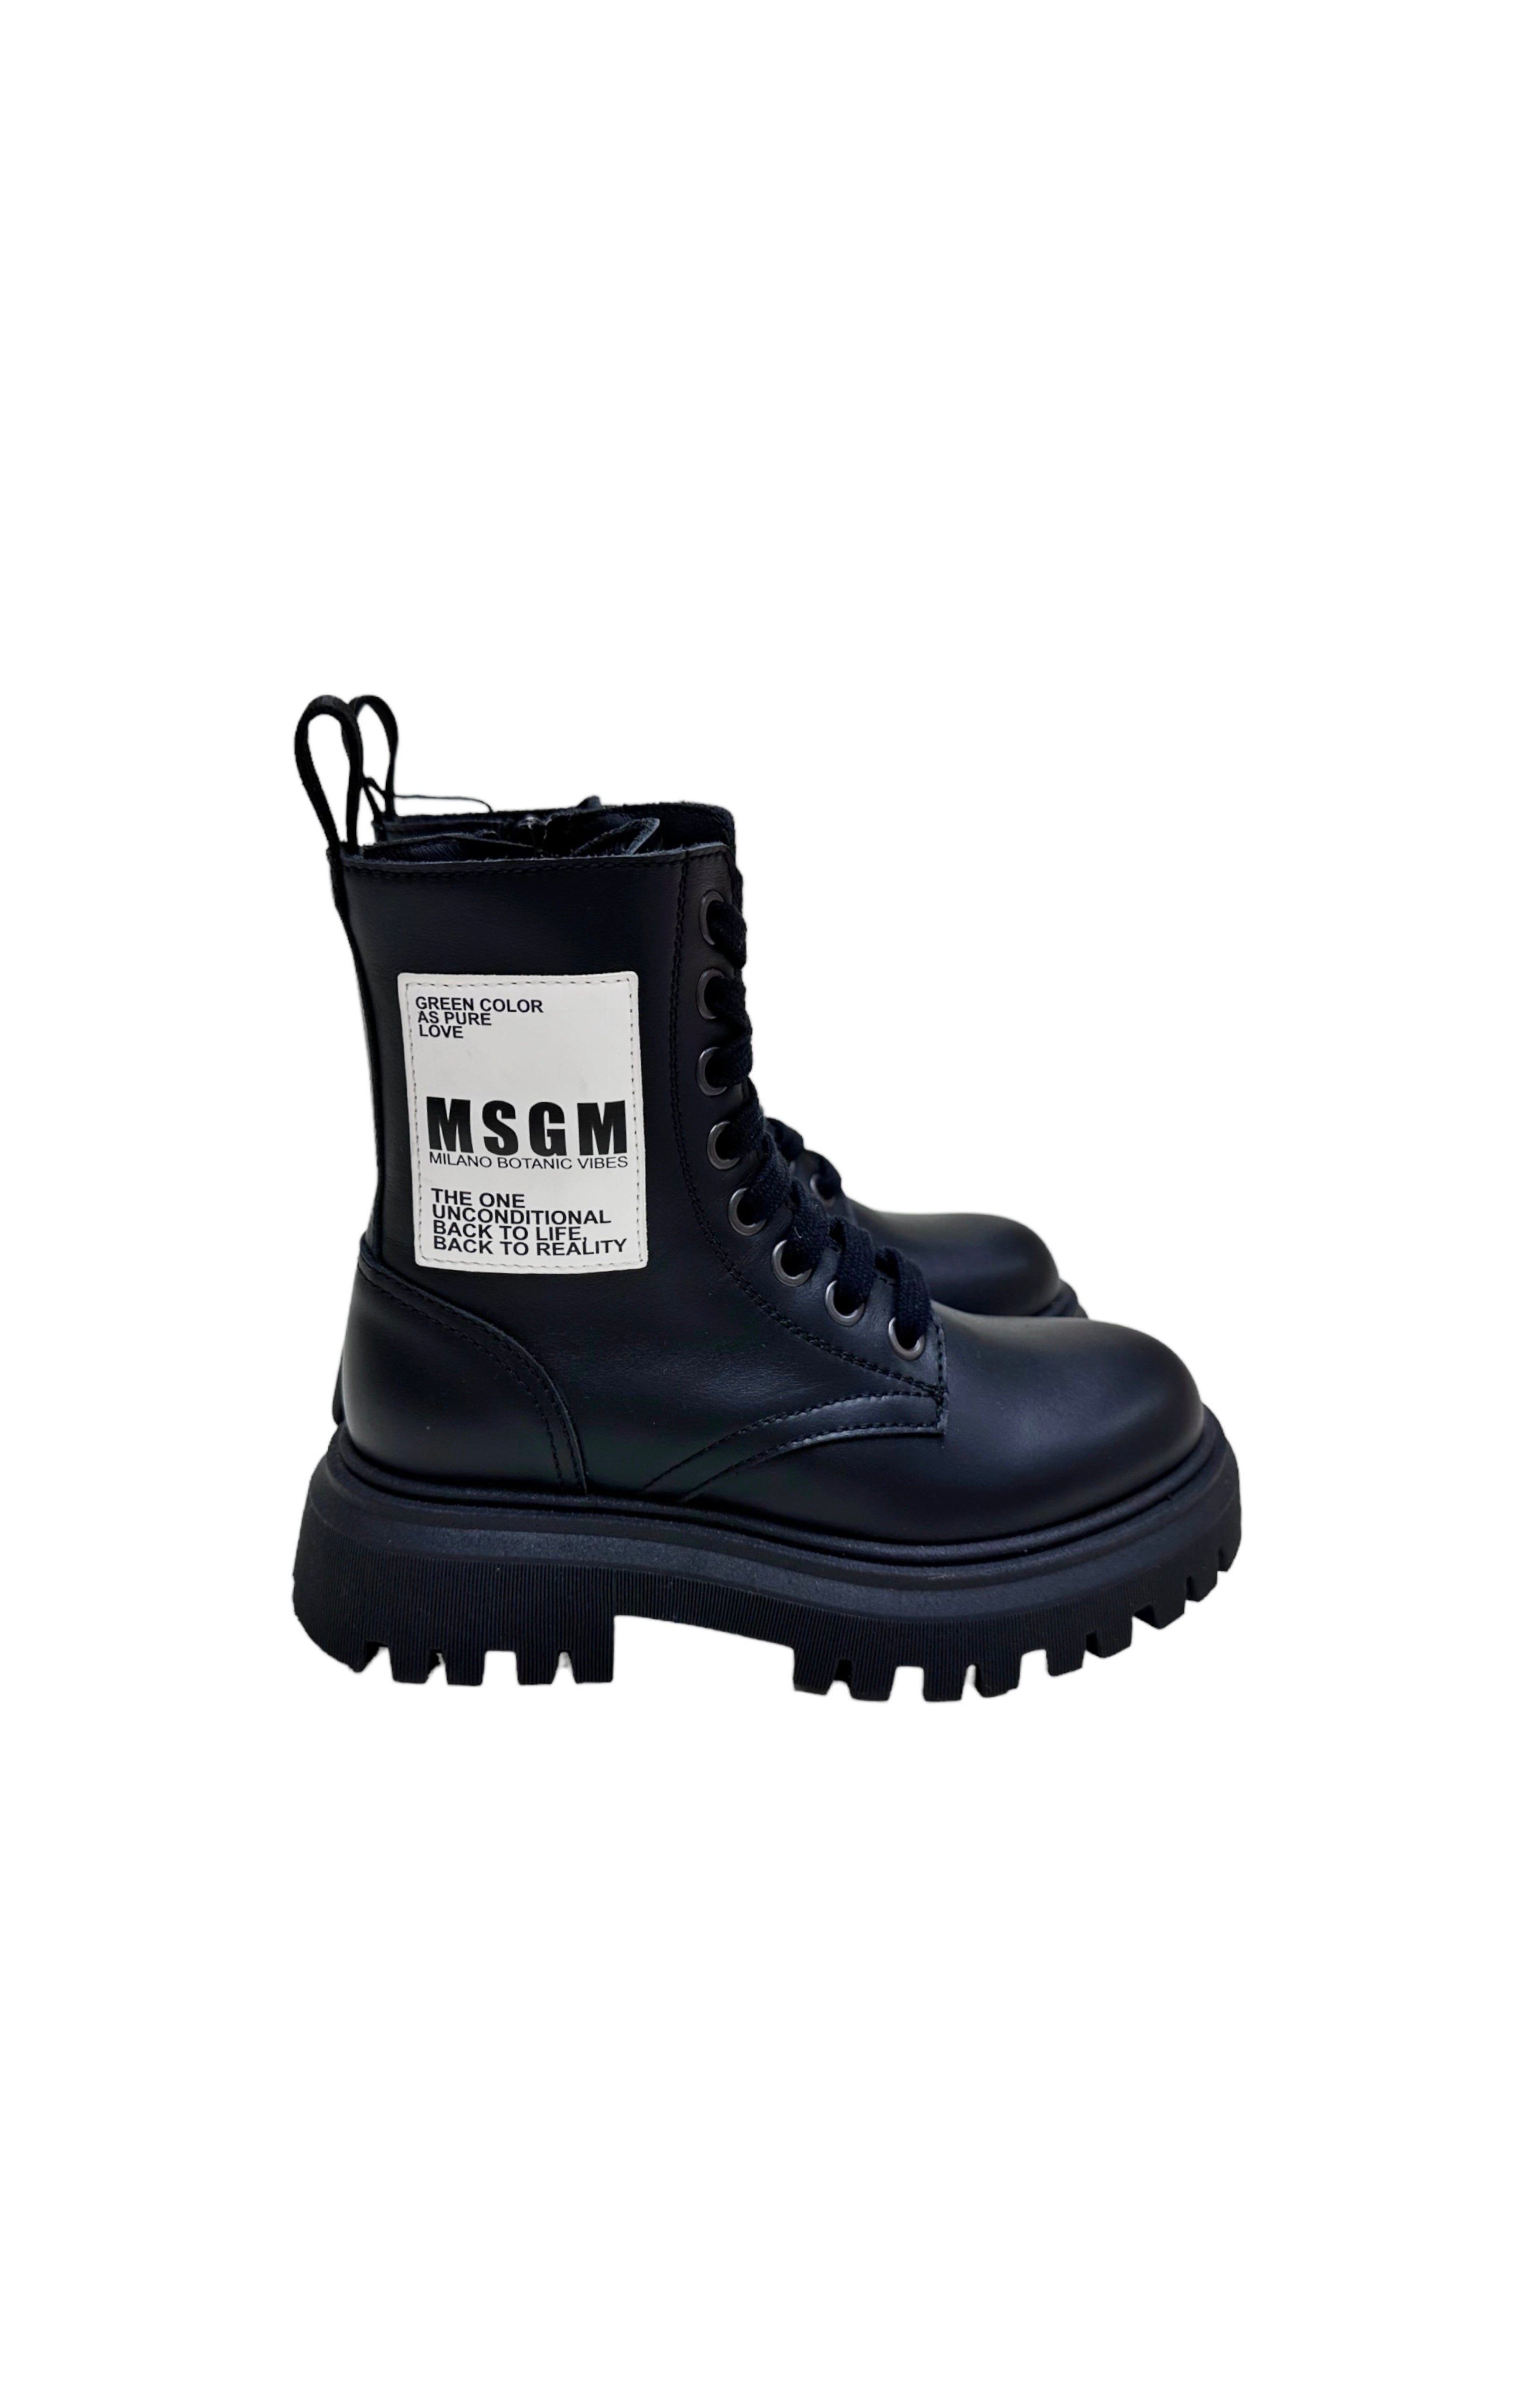 MSGM KIDS (NEW) with tags Boots Size: EUR 28 / Fits like Toddler US 11